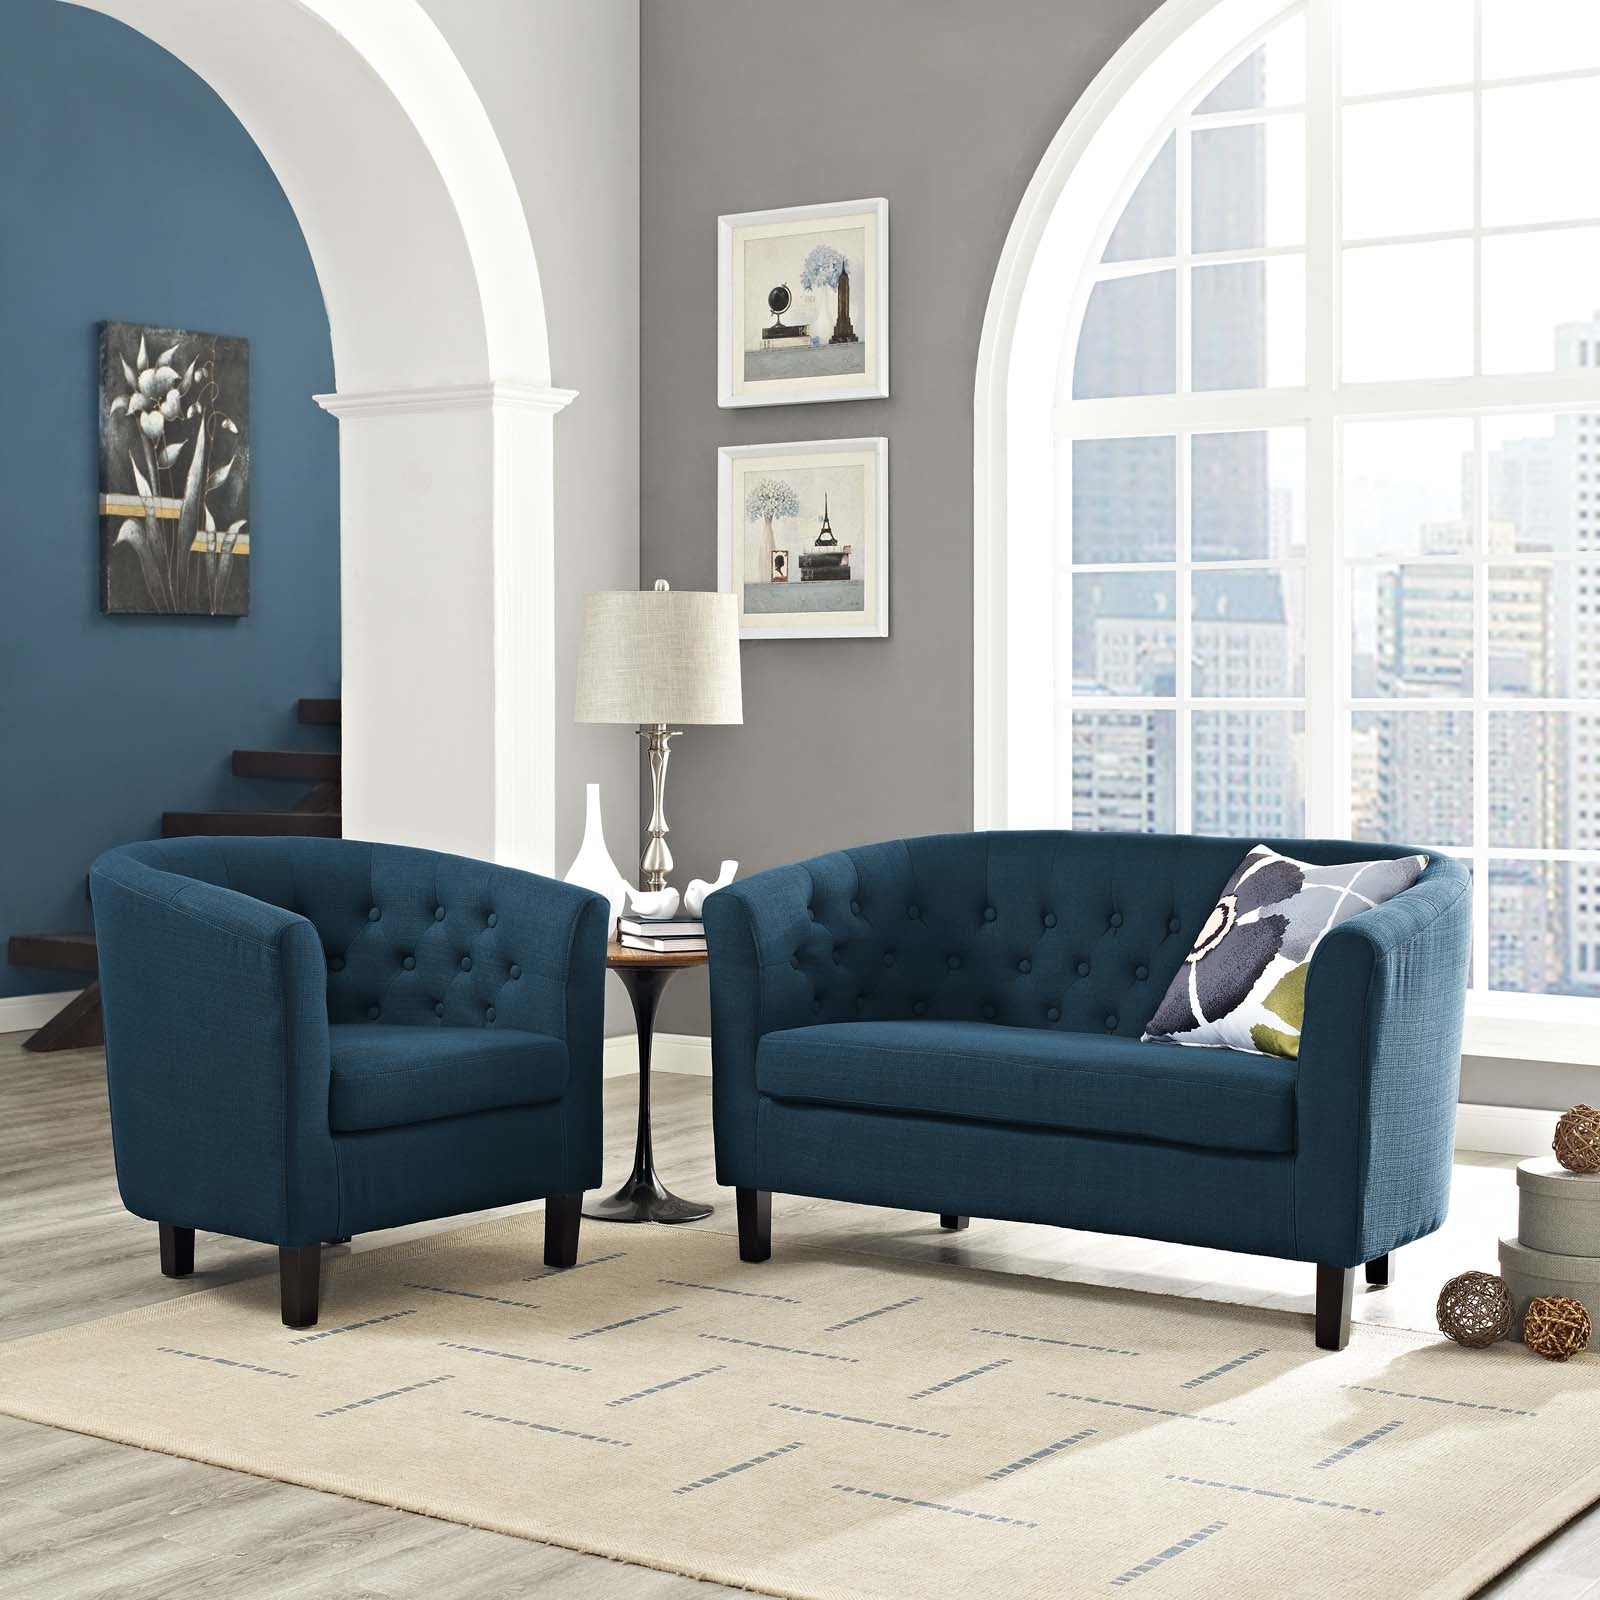 Modway Living Room Sets - Prospect 2 Piece Upholstered Fabric Loveseat and Armchair Set Azure